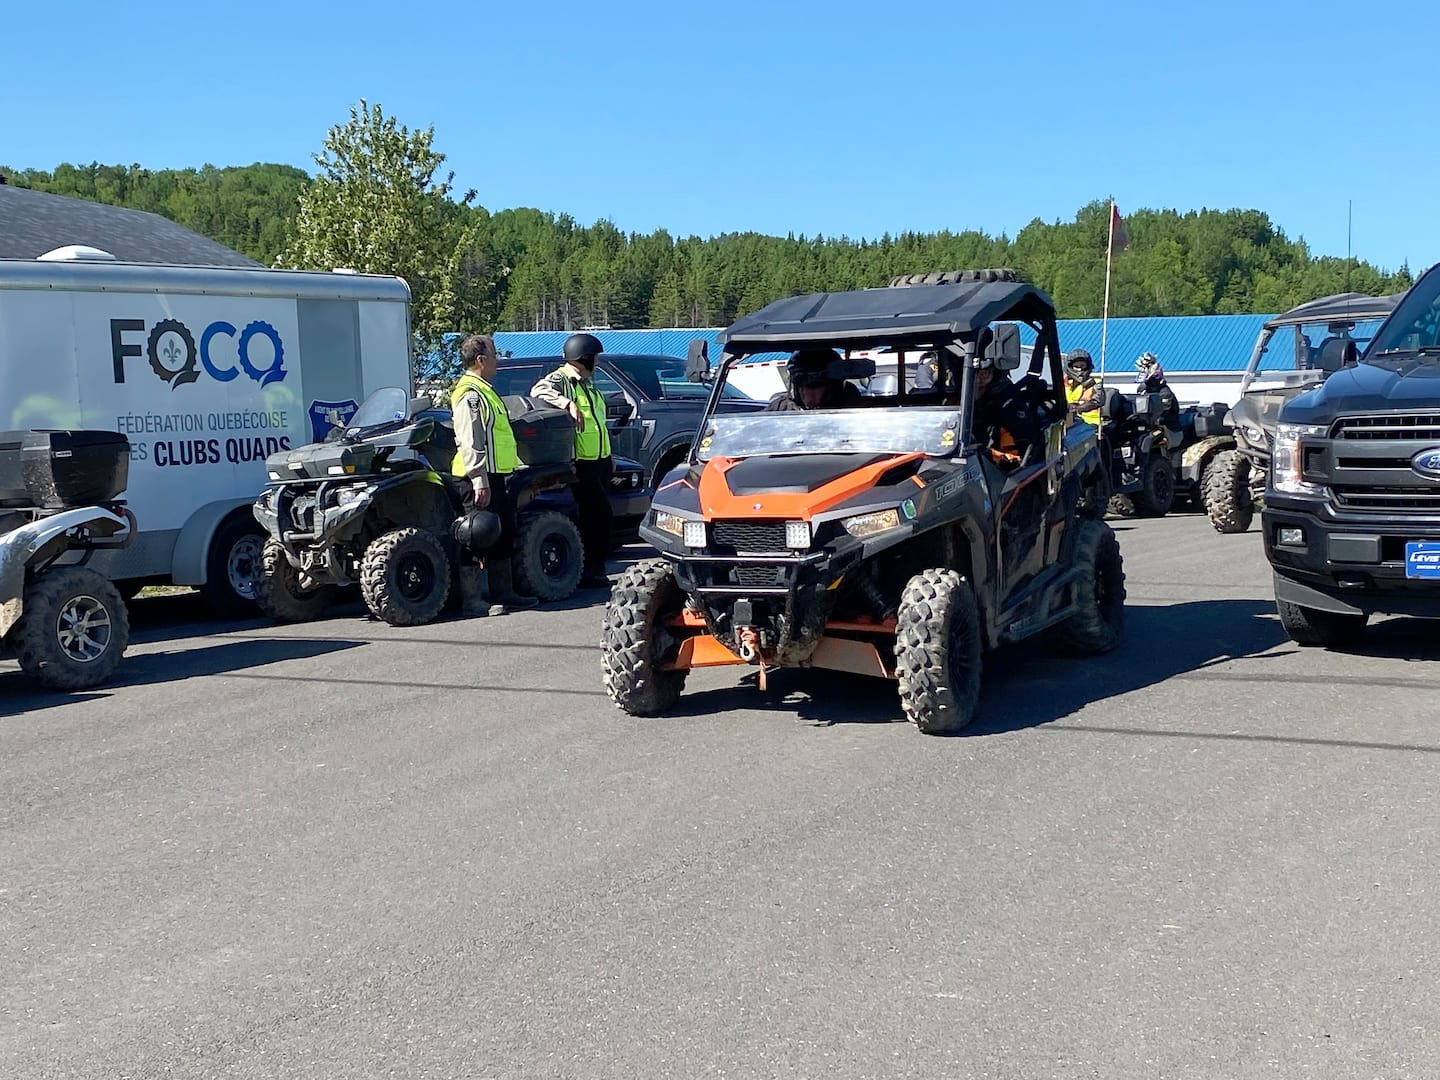 Several quad riders on the trails in Gaspésie